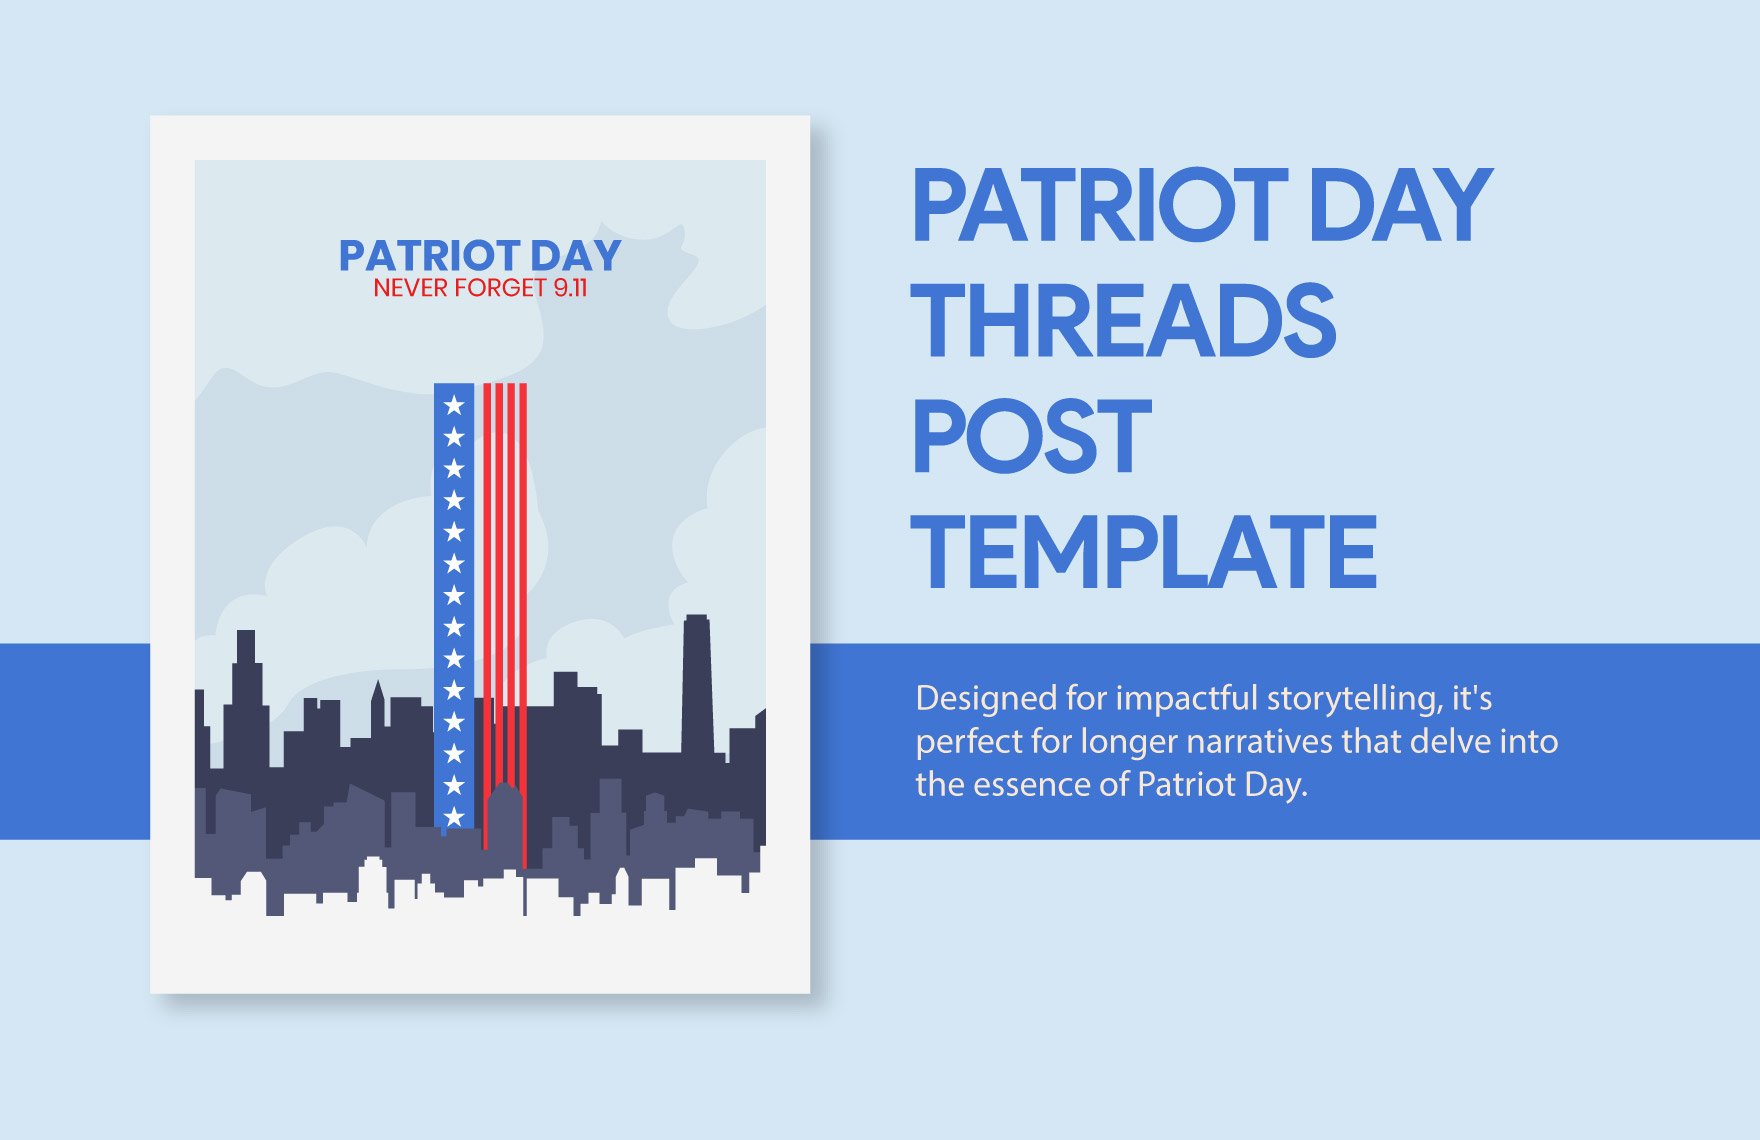 Free Patriot Day Threads Post Template in Illustrator, PSD, PNG